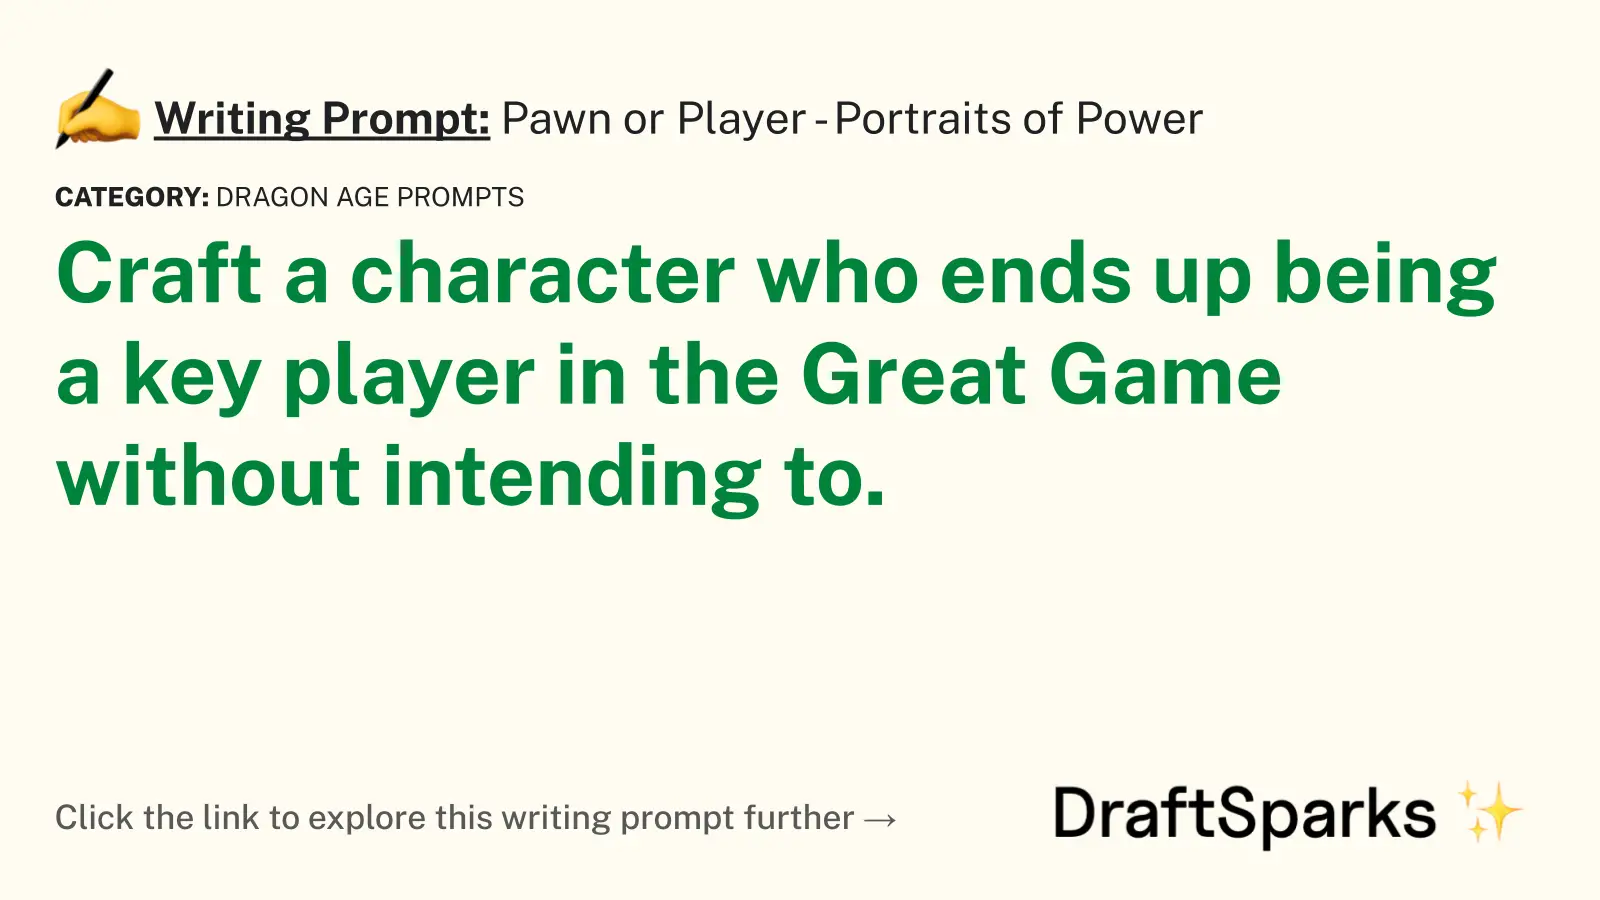 Pawn or Player – Portraits of Power